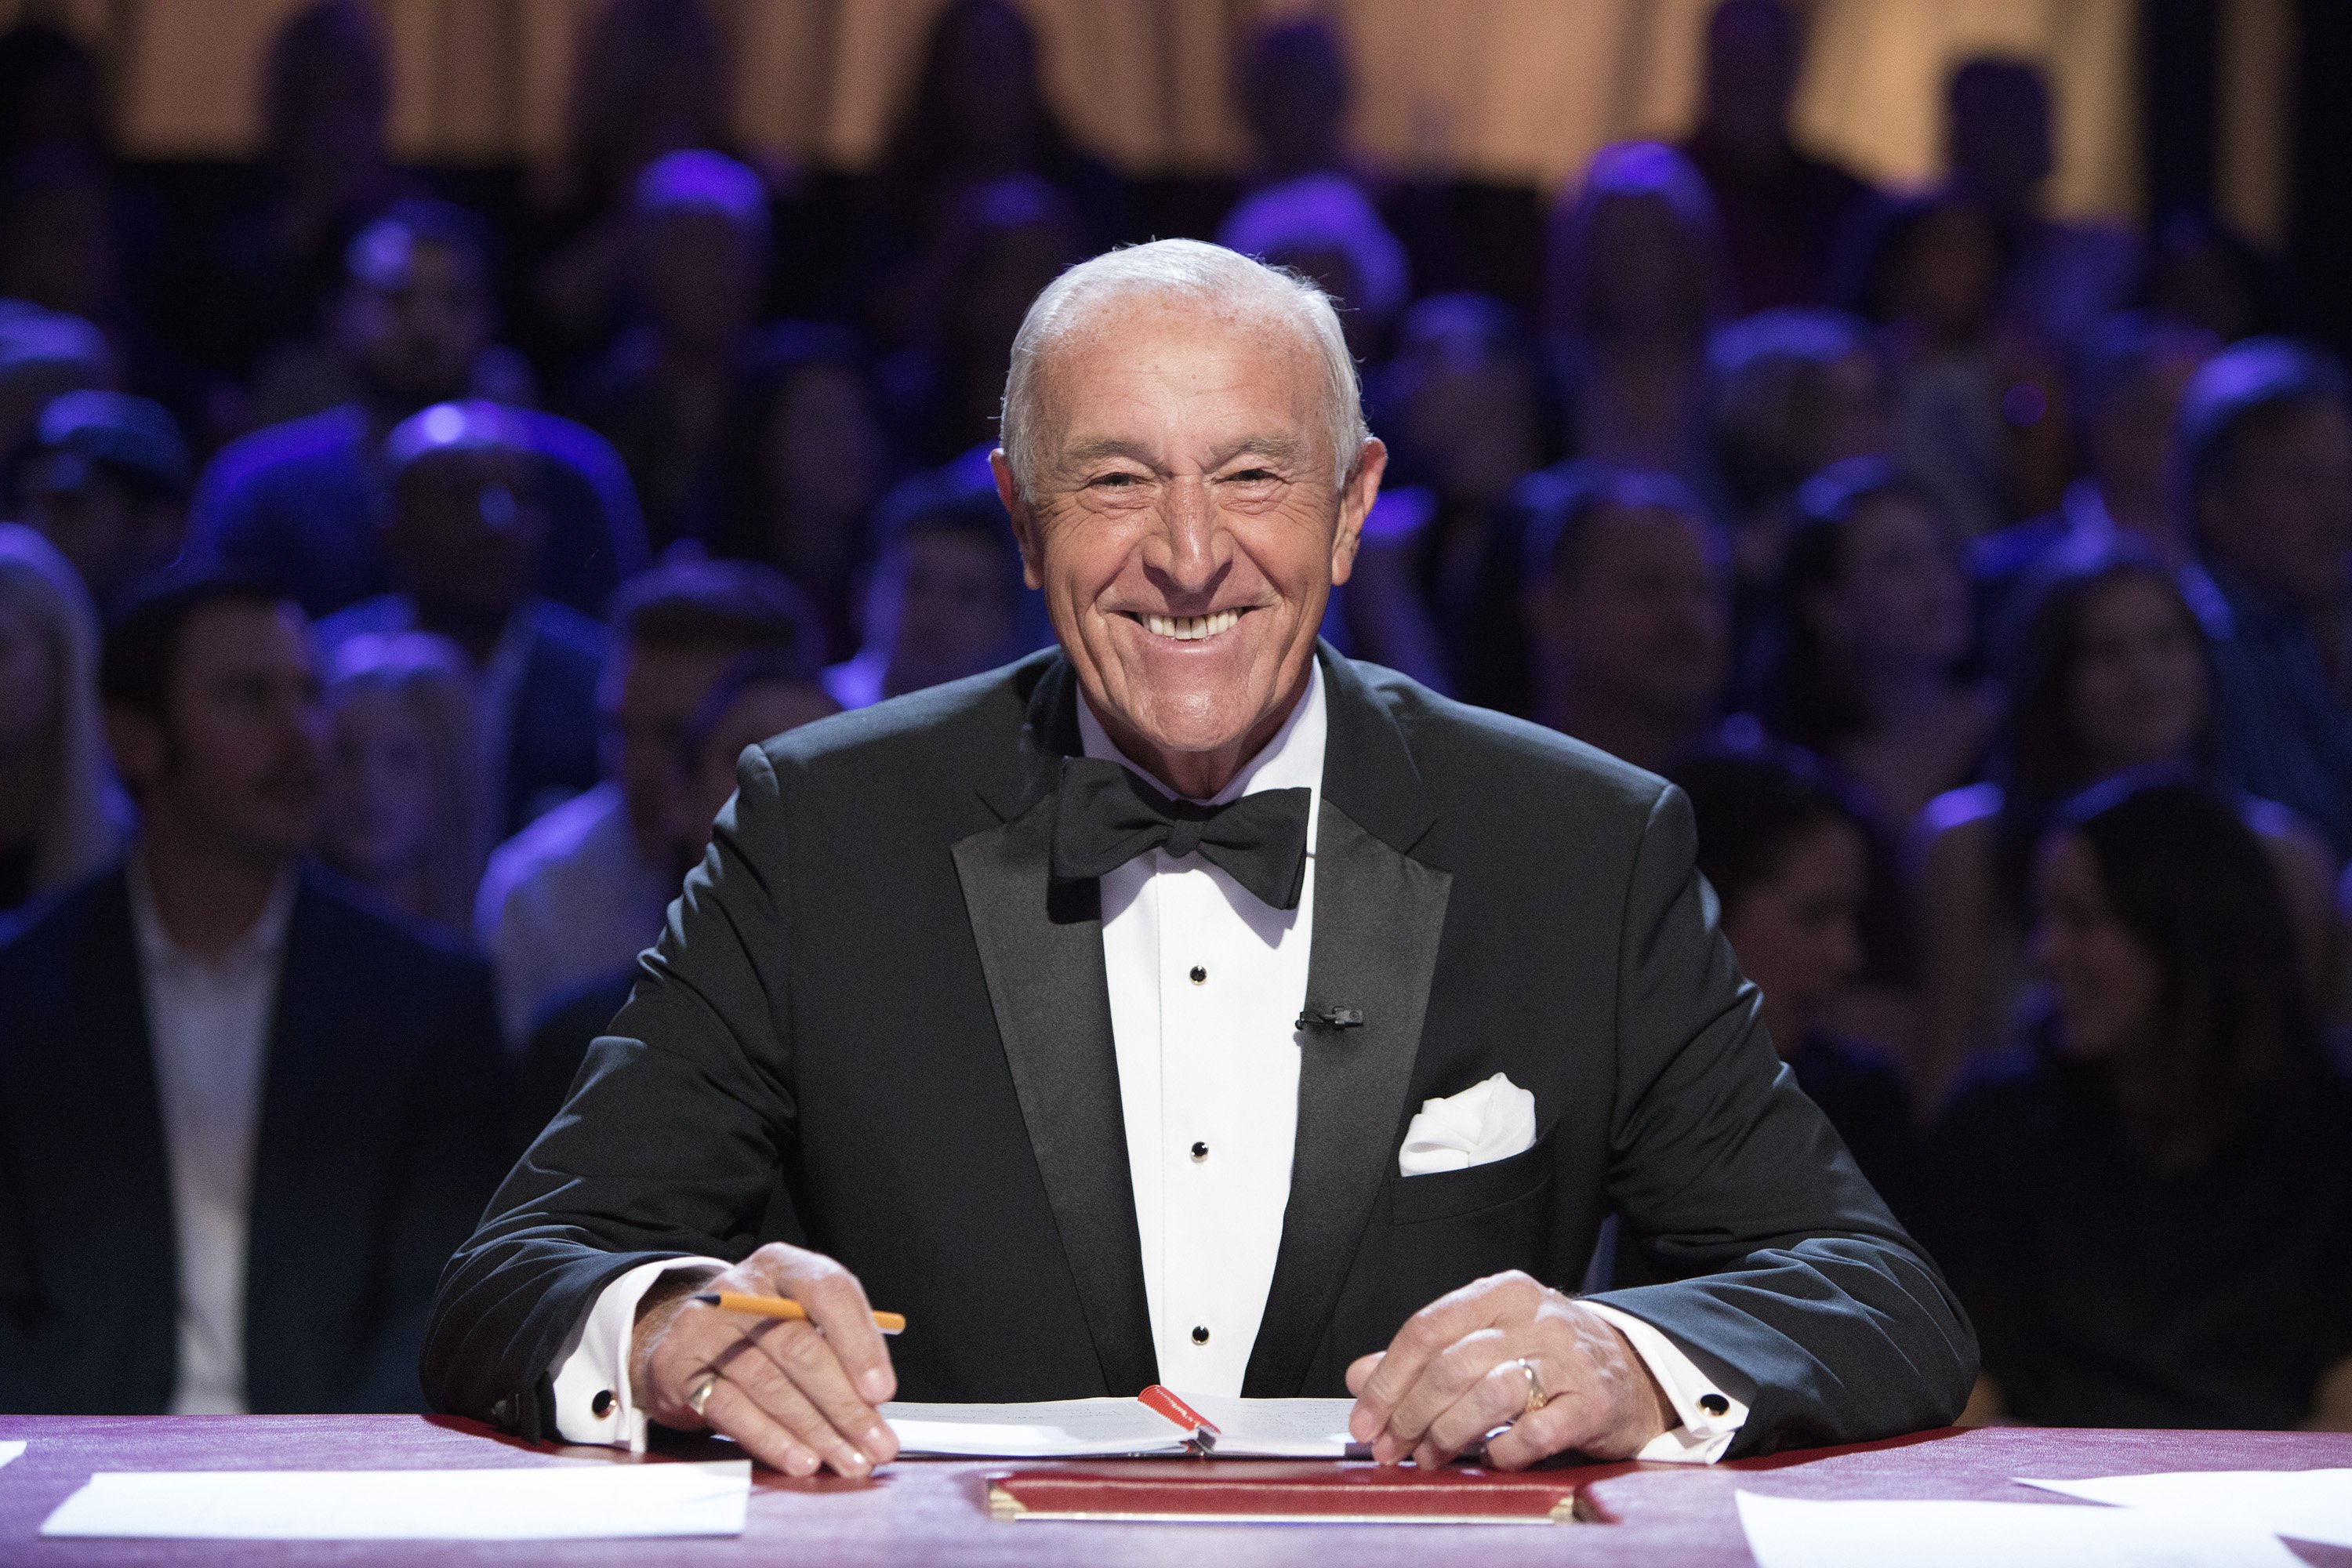 Len Goodman on ABC's "Dancing With the Stars": Season 25 "Episode 2511" on November 21, 2017 | Source: Getty Images 